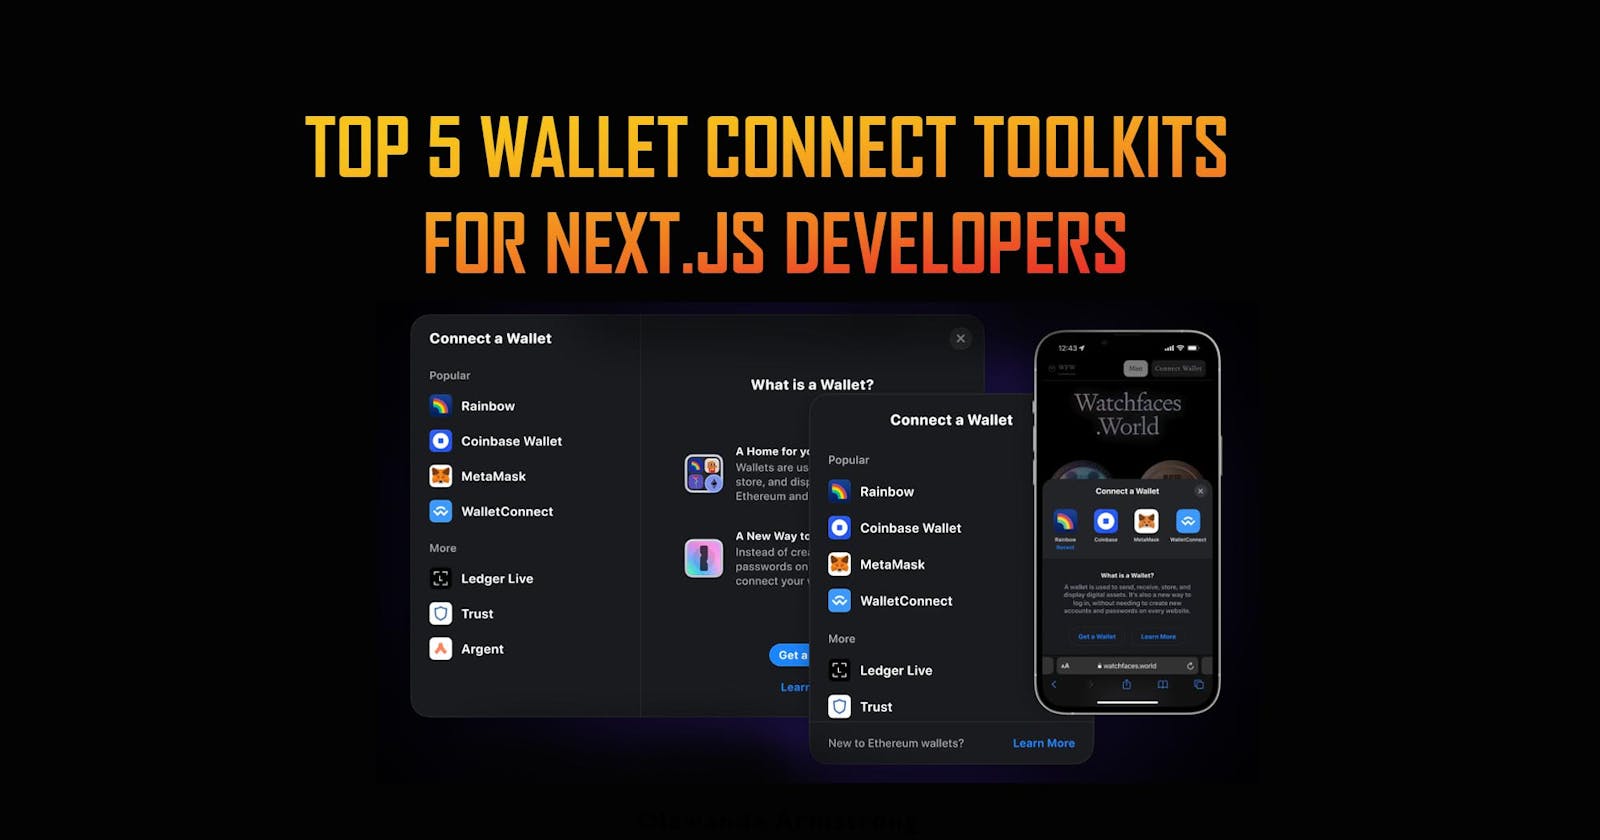 Top 5 Wallet Connection Toolkits for Next.js Developers